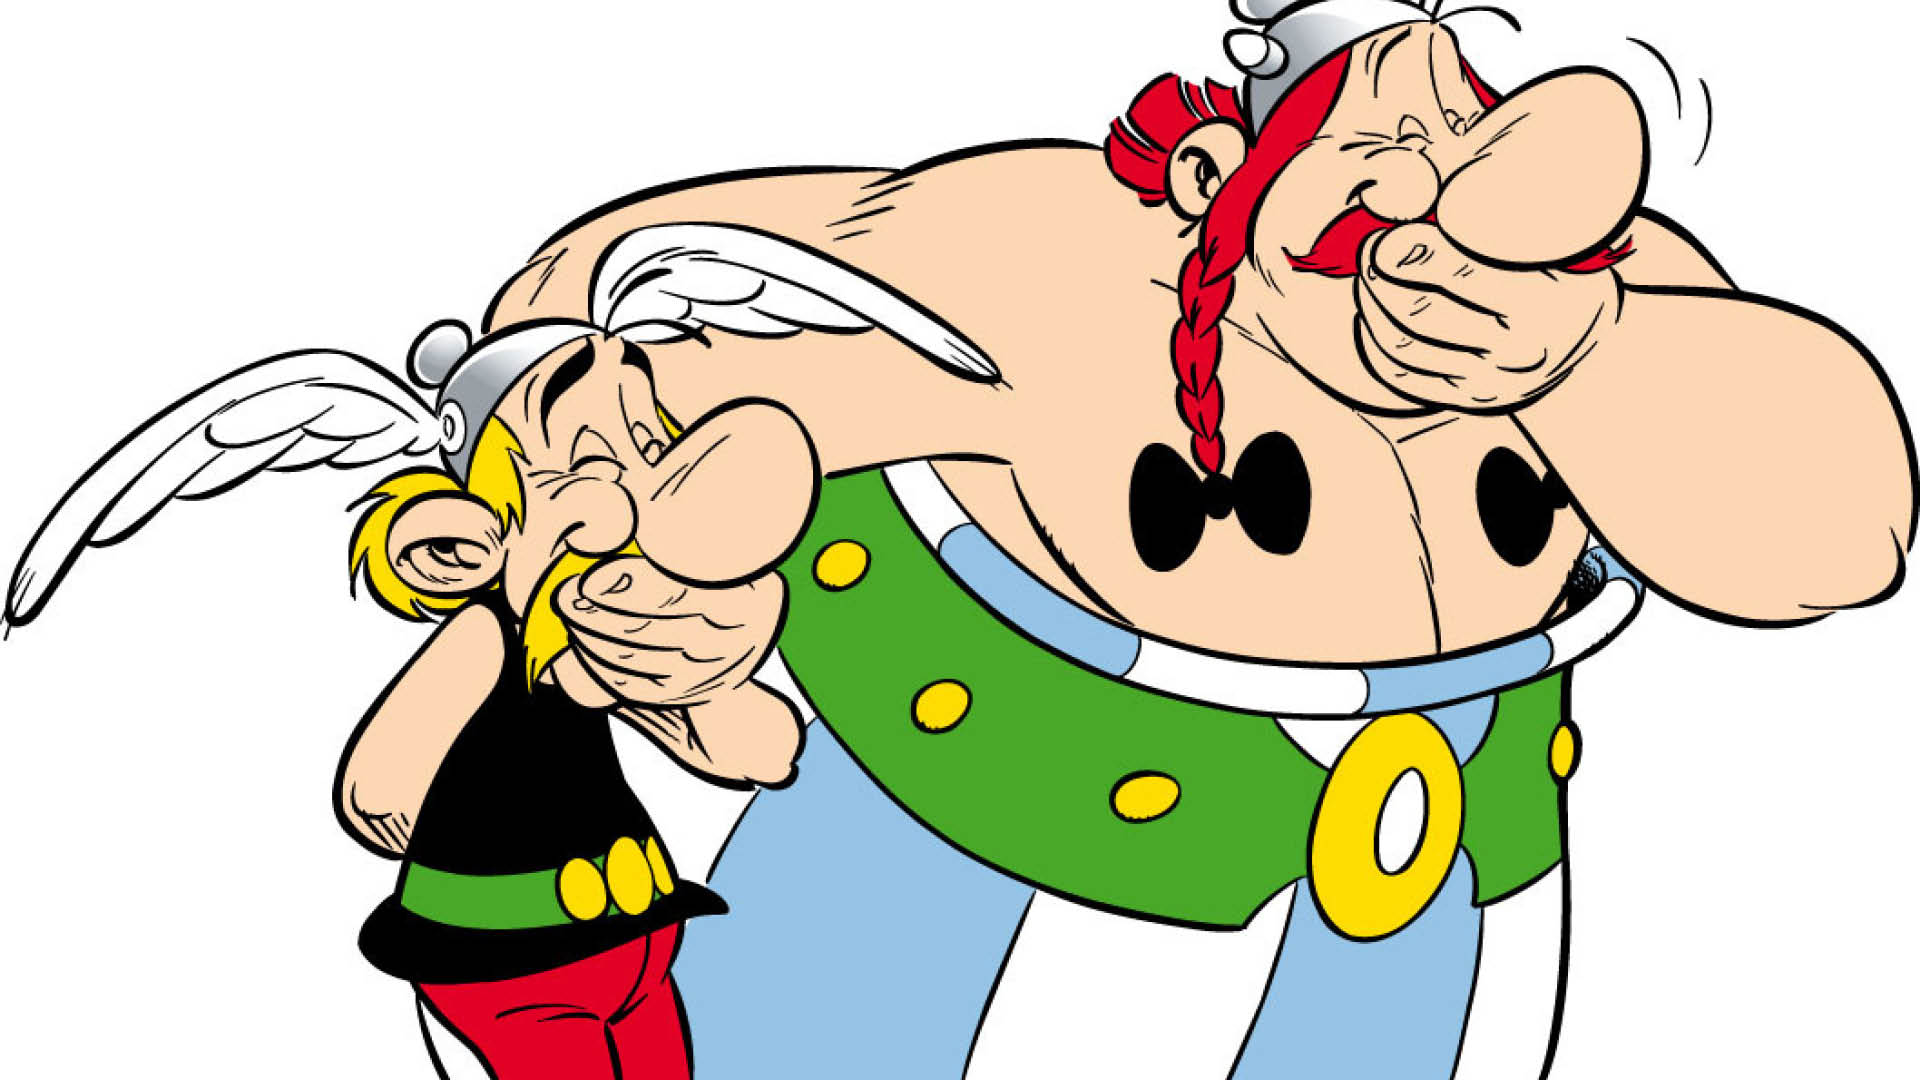 PLAYMOBIL Announces ASTERIX and OBELIX License Cooperation